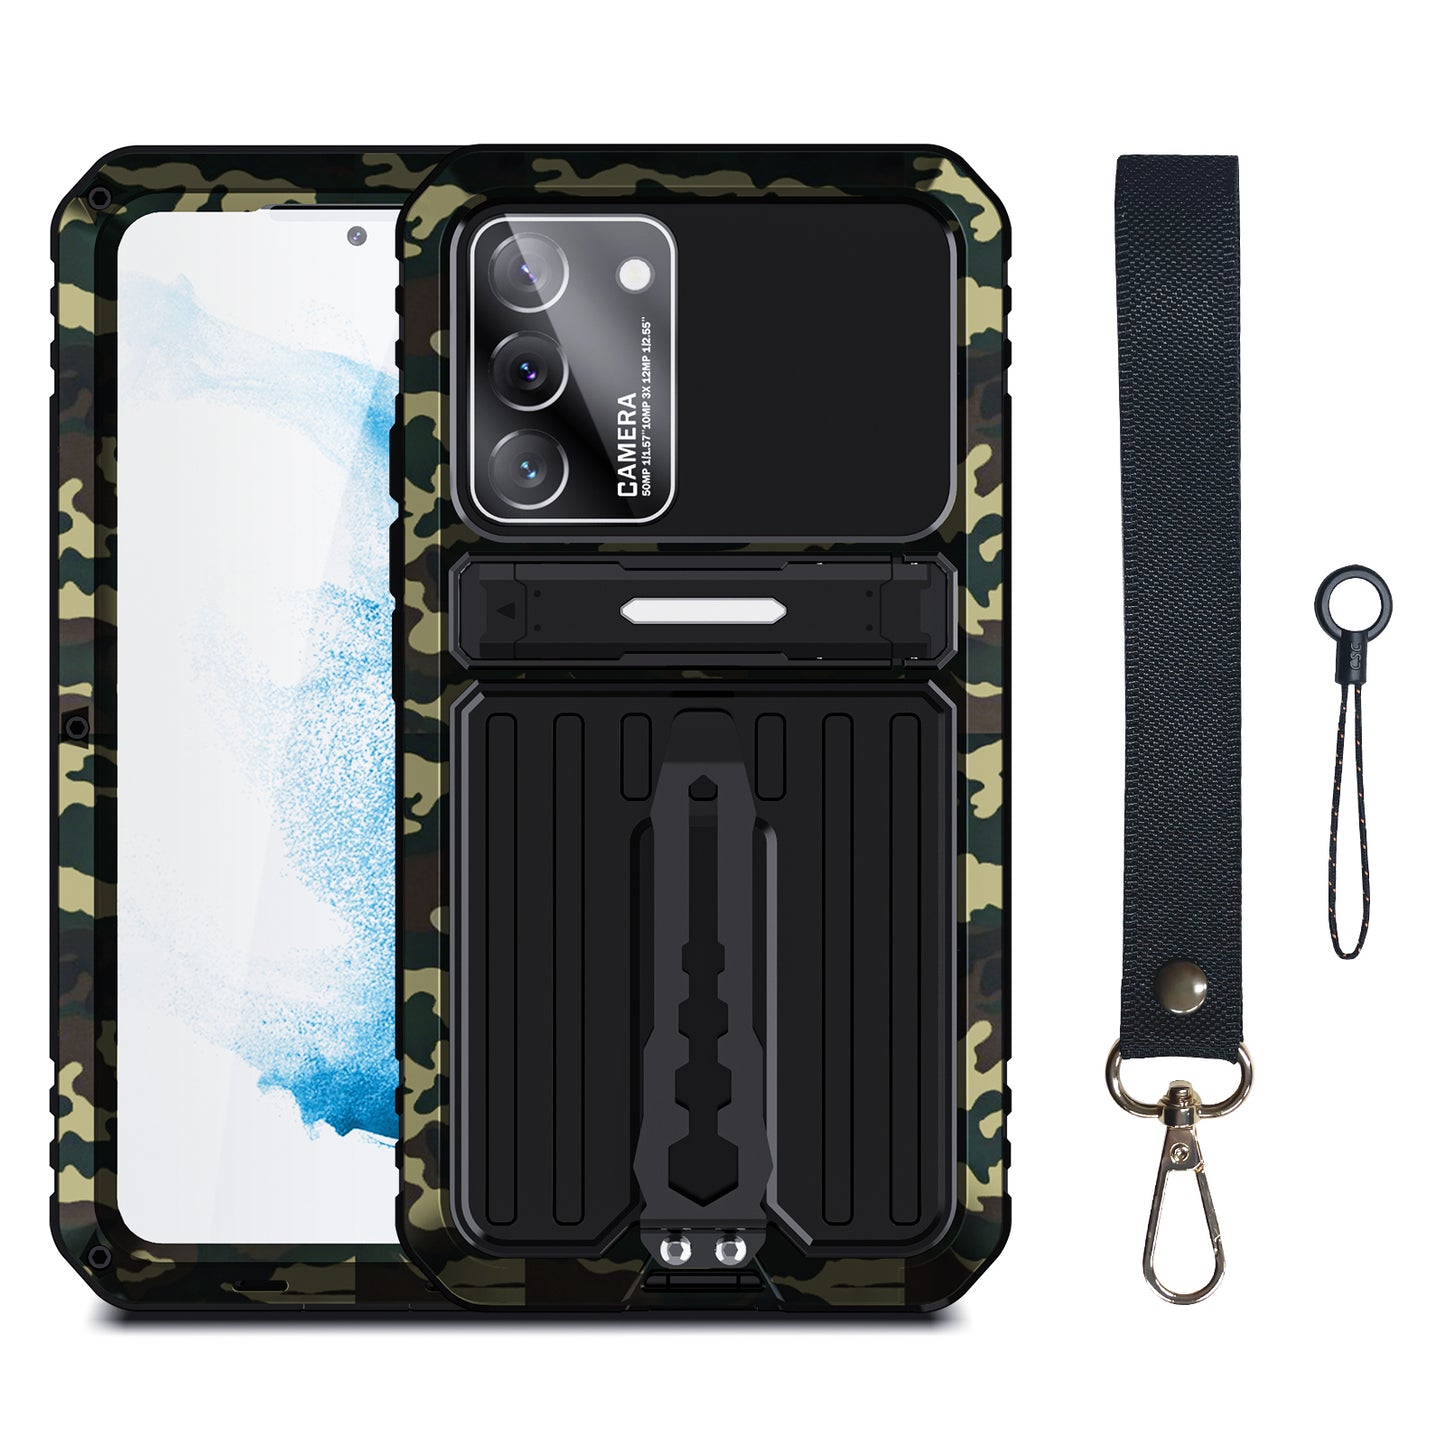 Military Case Samsung Galaxy S22 Ultra Armor Cover Shockproof Plus Metal Back Clip Invisible Bracket